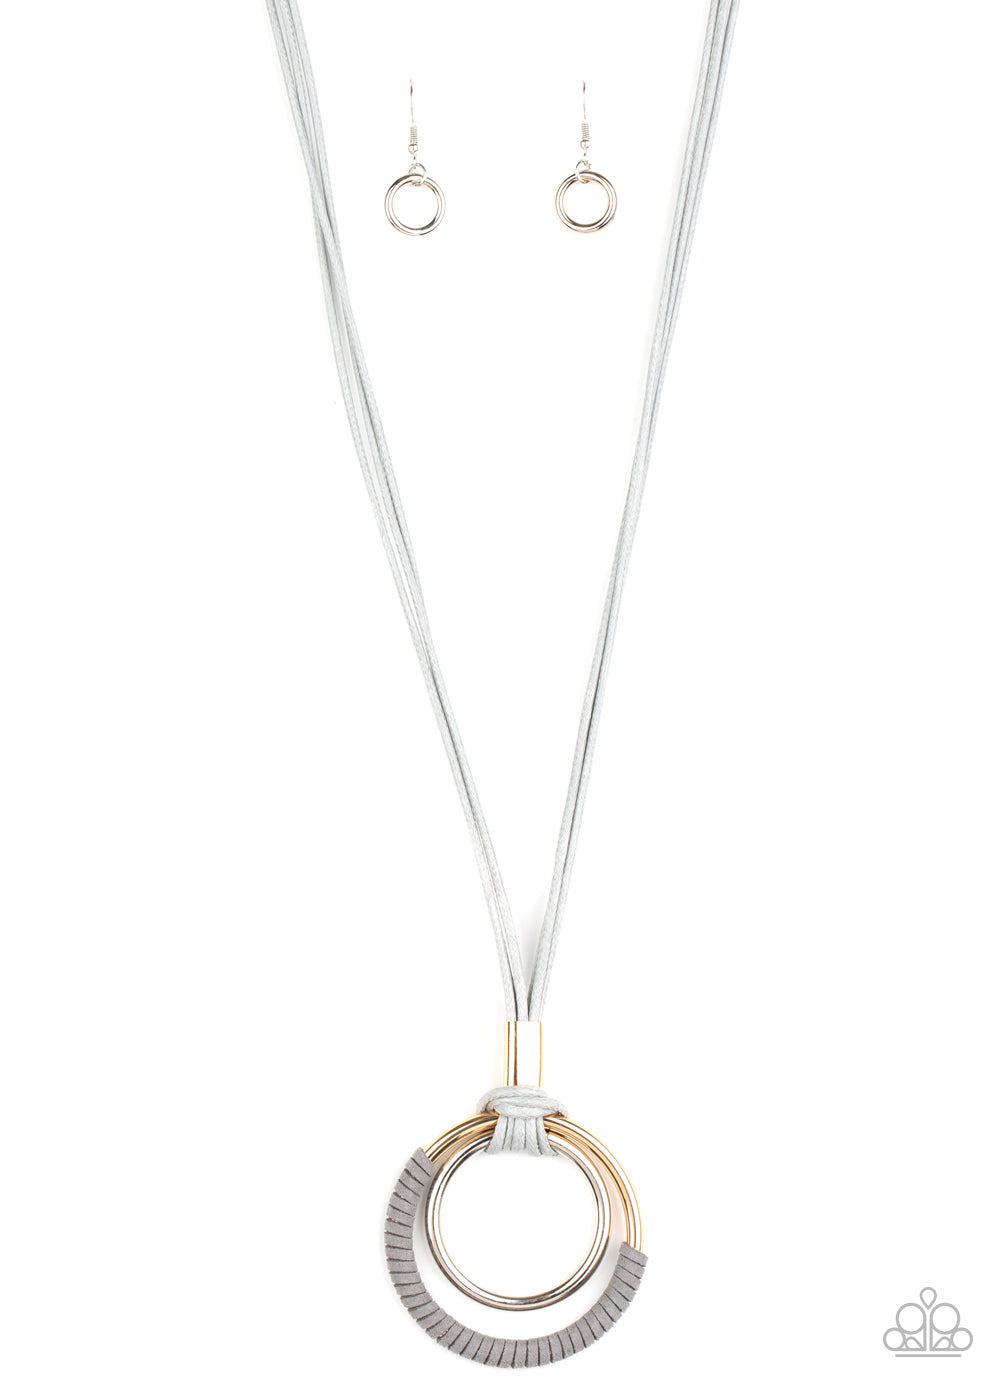 Elliptical Essence - Paparazzi - Silver and Gold Circle Hoop Grey Cord Pendant Necklace